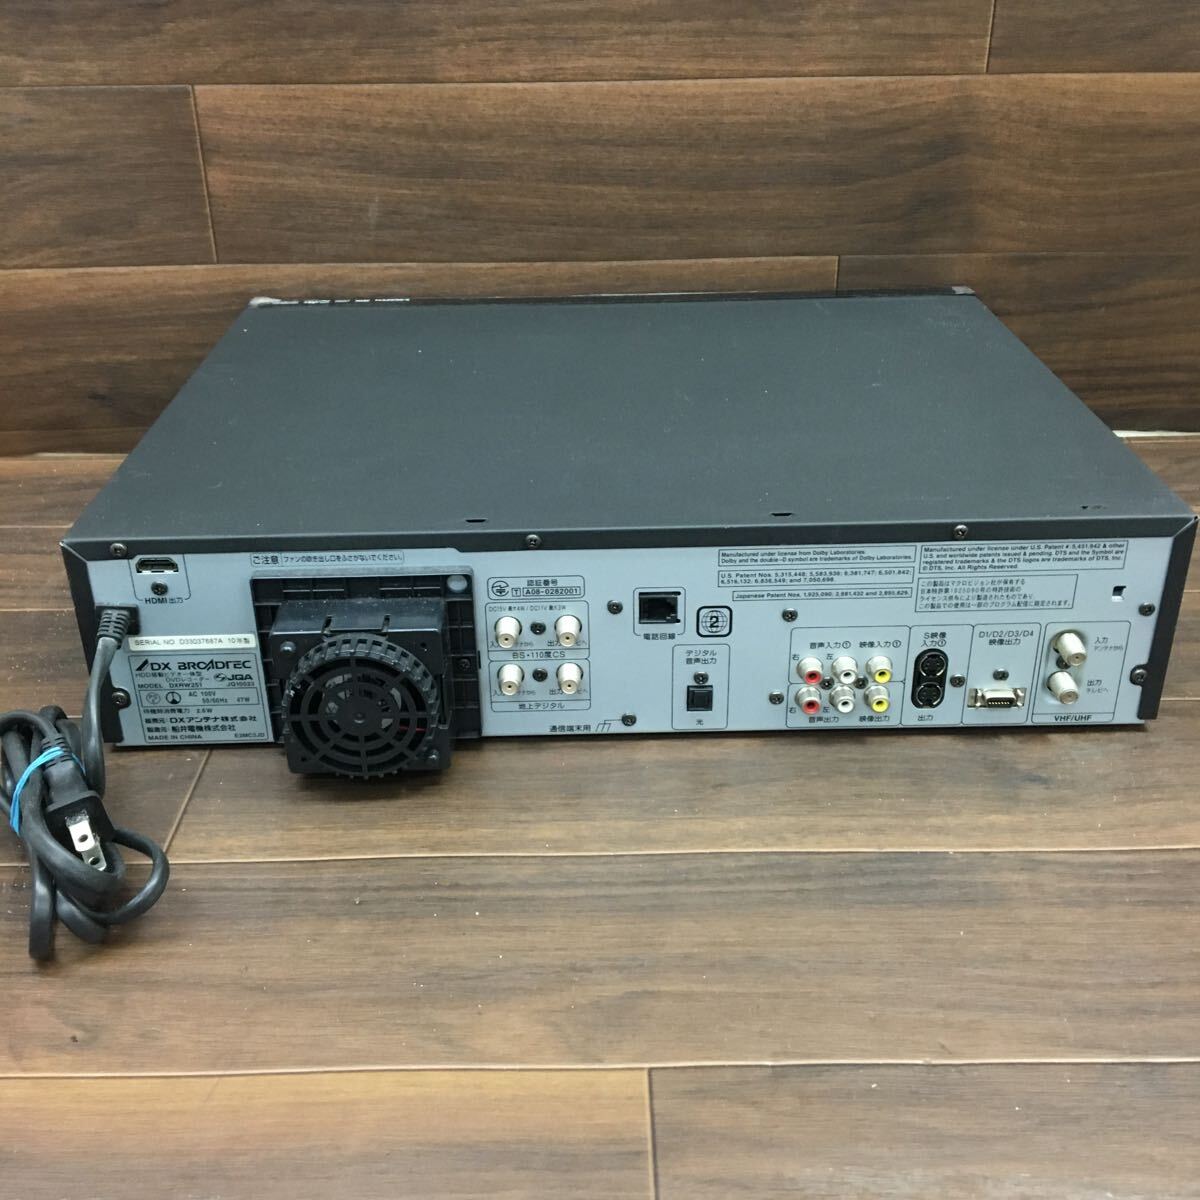 *B-908 DX antenna HDD installing video one body DVD recorder DXRW251 VHS DVD HDD digital broadcasting image equipment black electrification has confirmed 